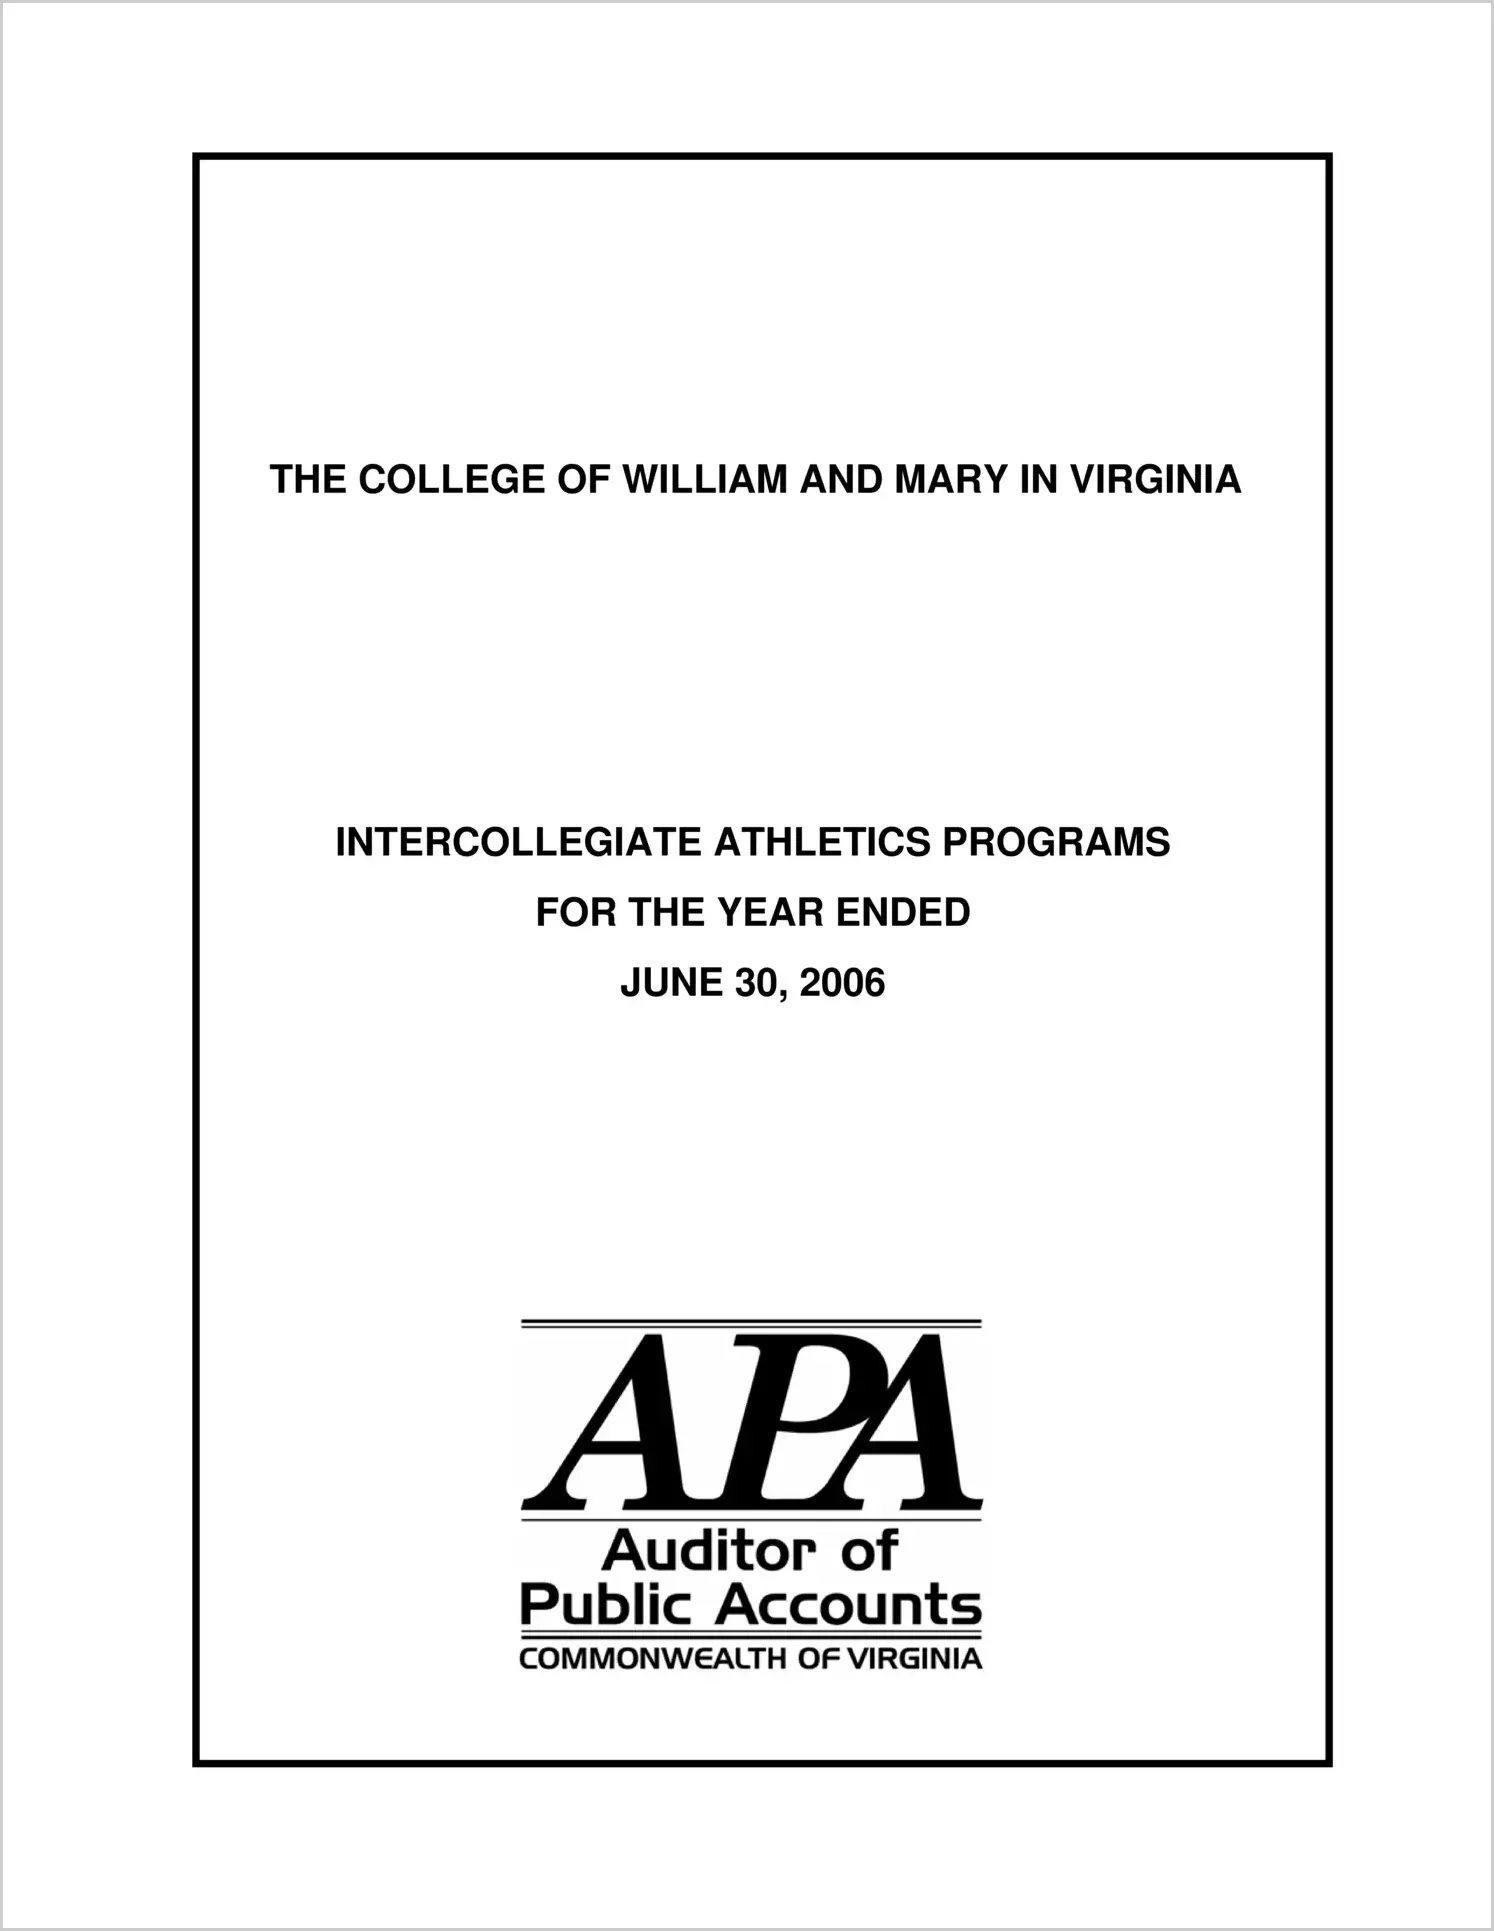 The College of William and Mary Intercollegiate Athletics Programs for the year ended June 30, 2006